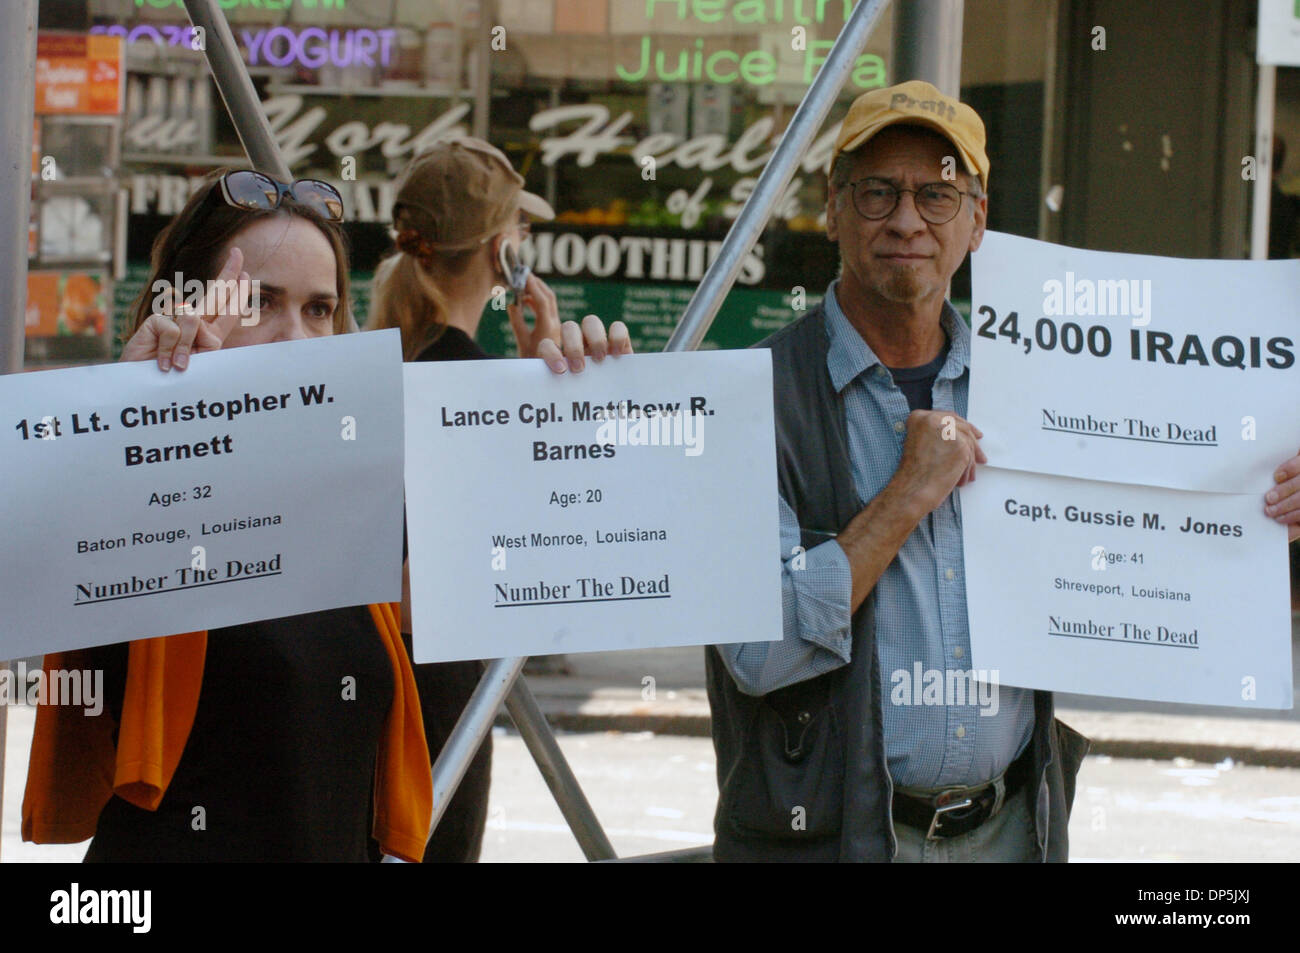 Sep 17, 2006; Manhattan, NY, USA; People line Fifth Avenue holding signs with the names of U.S. soldiers killed in war in Iraq in a demonstration called 'Number The Dead'. The demonstration is an effort to draw attention to the number of U.S. soldiers killed and Iraqi civilians killed as a result of the war in Iraq.  Mandatory Credit: Photo by Bryan Smith/ZUMA Press. (©) Copyright  Stock Photo